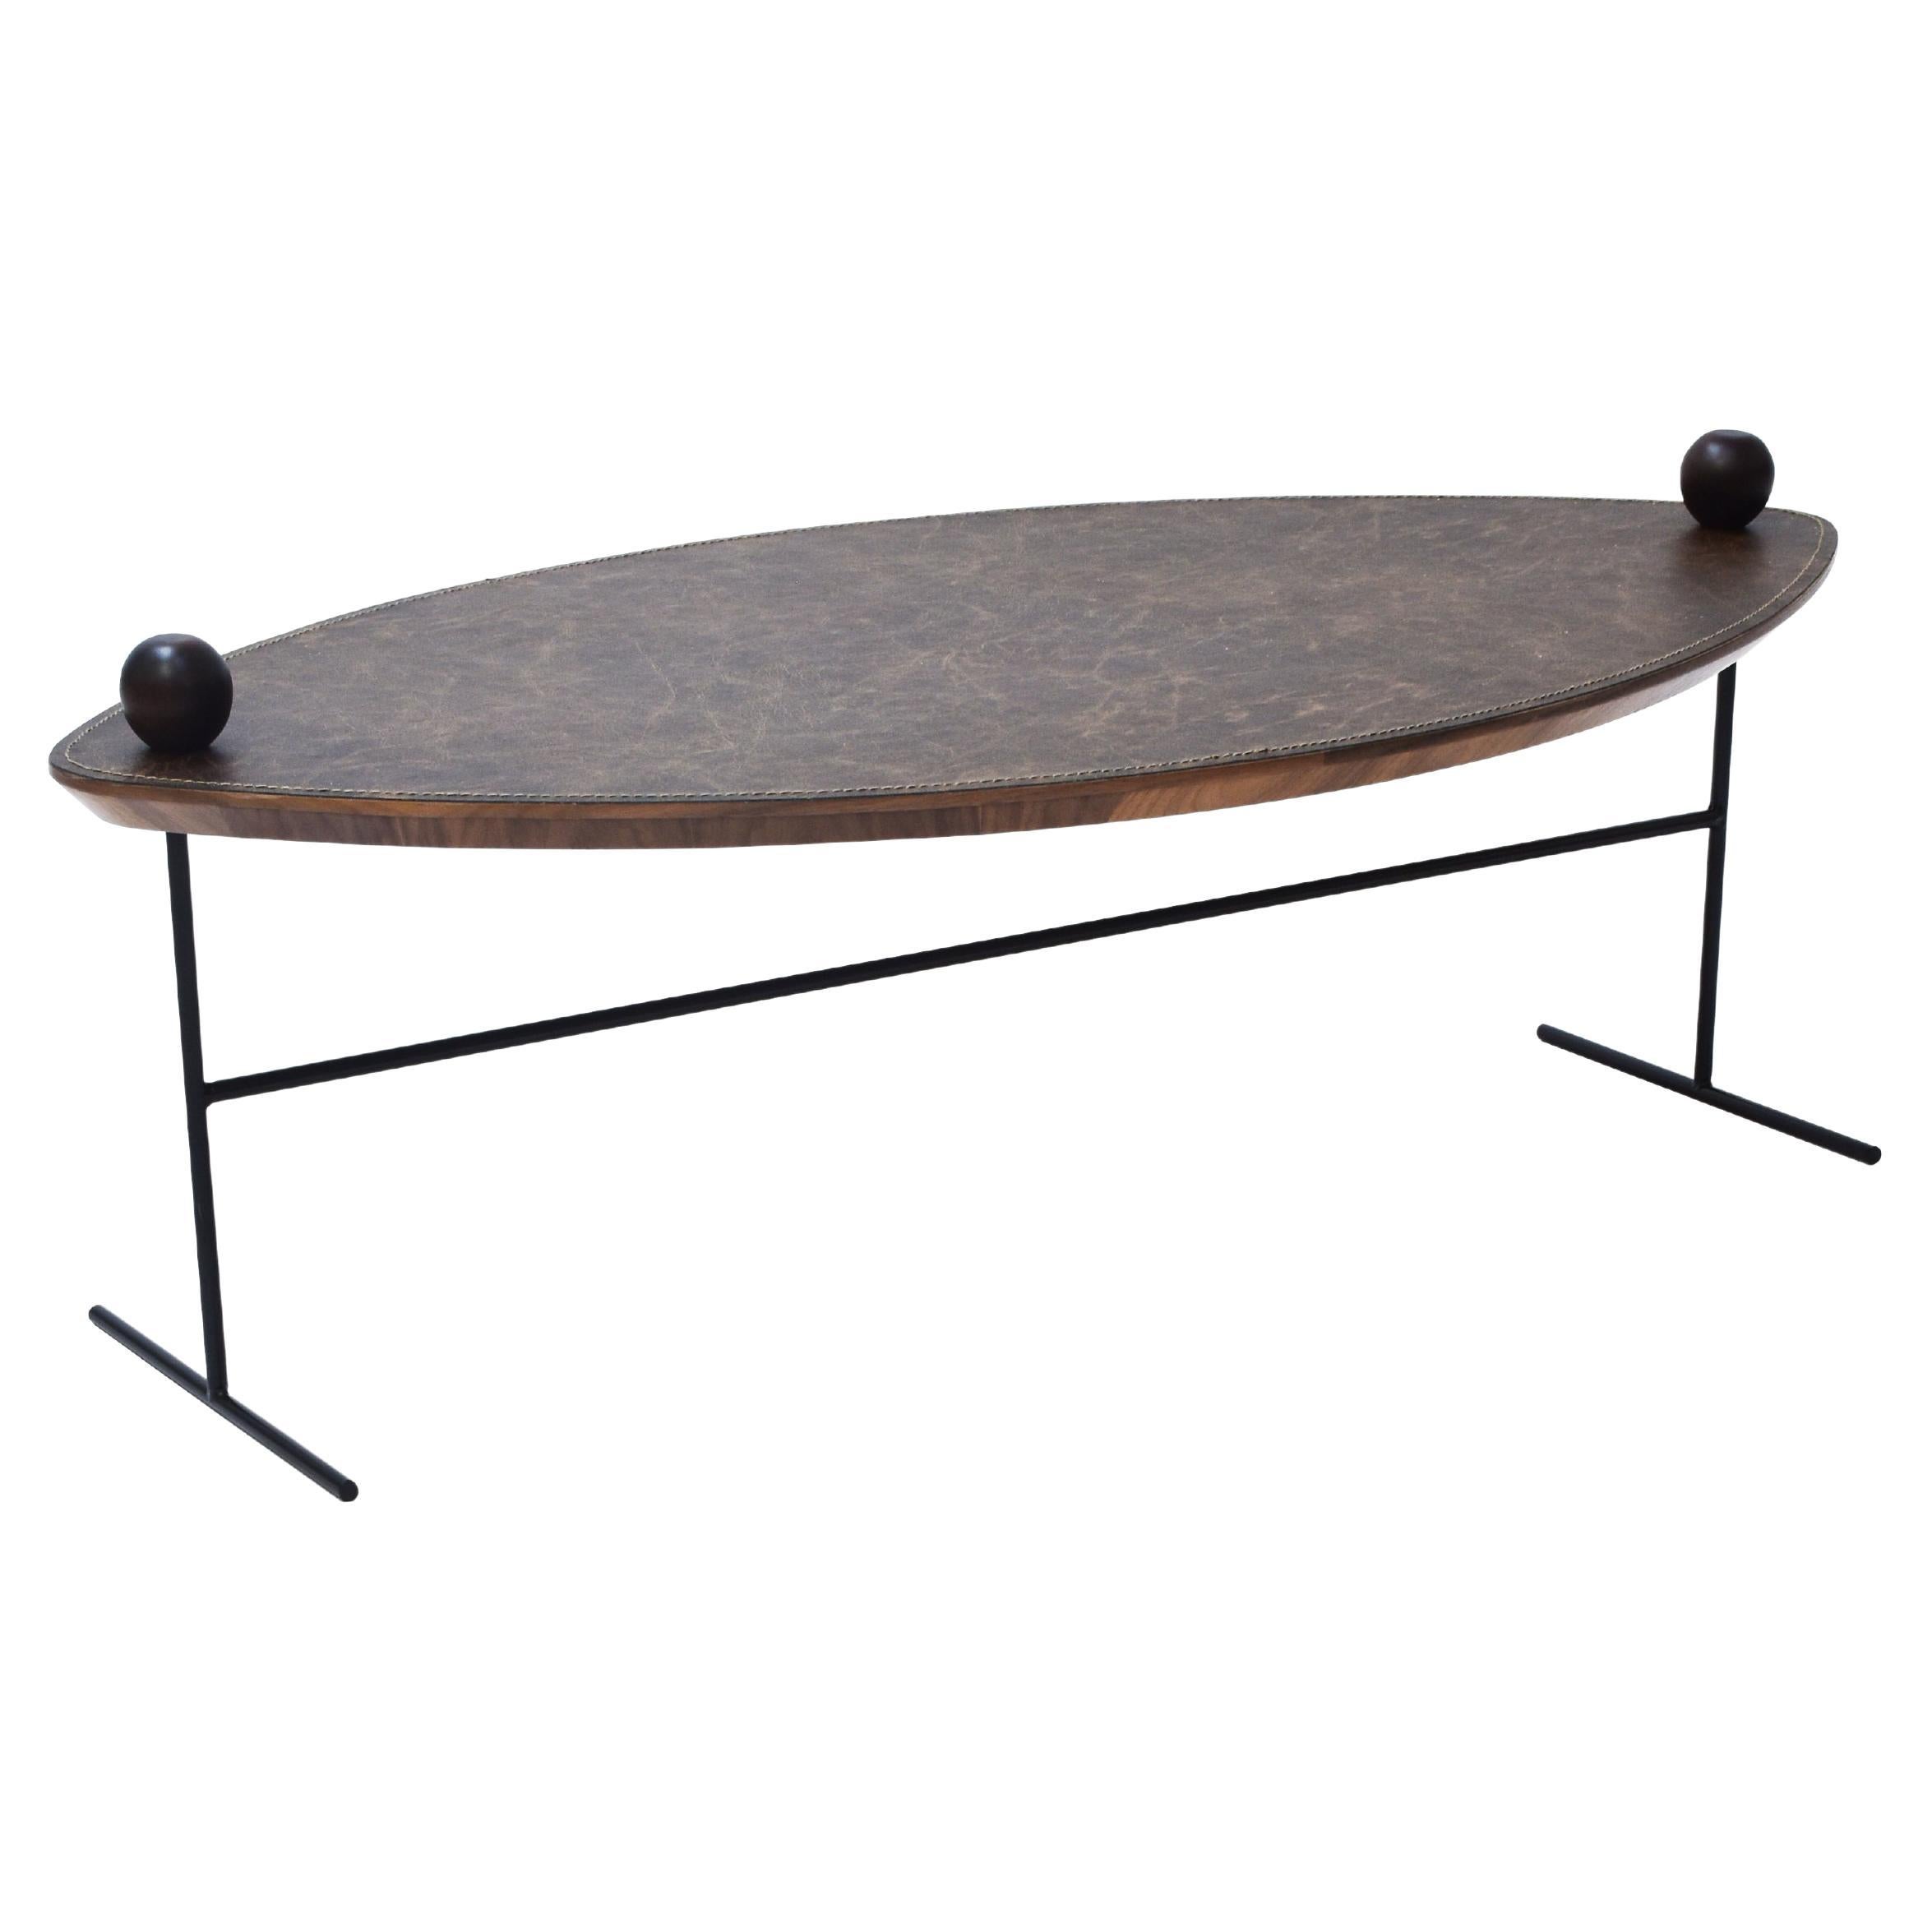 "Leaf" Center Table in Golden Carbon Steel and Leather Covered Top